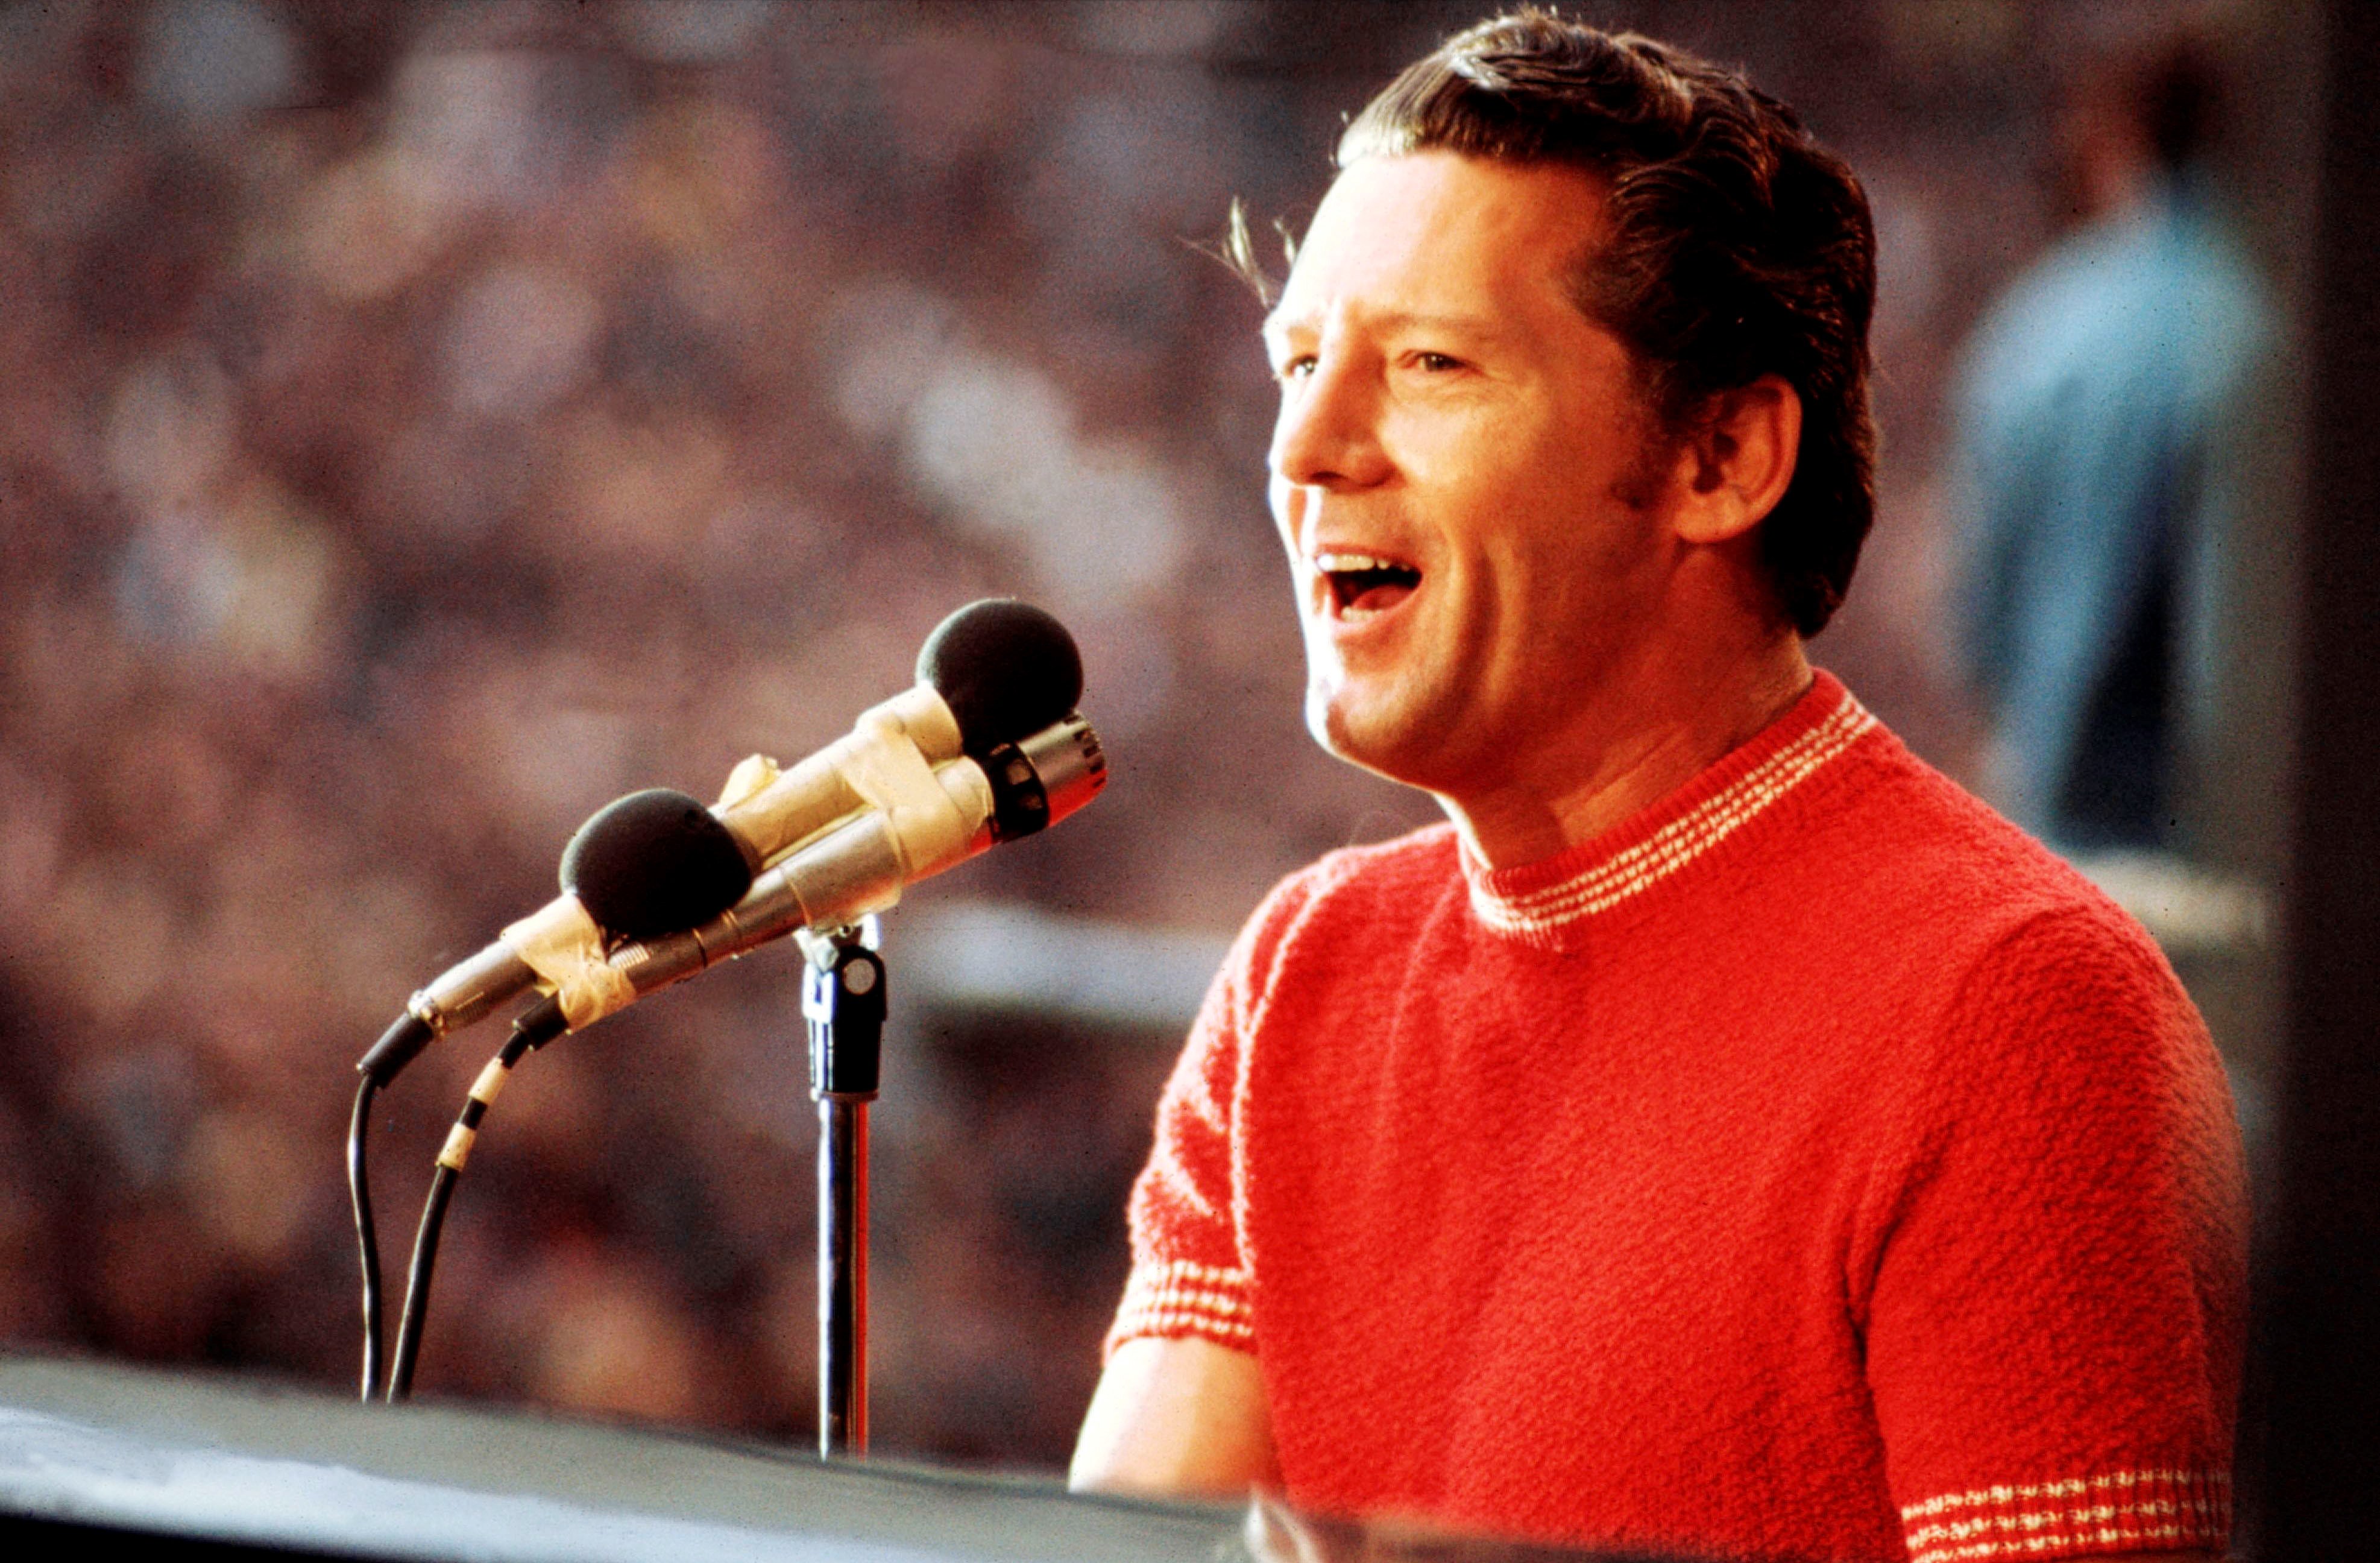 Jerry Lee Lewis performs at the London Rock'n'Roll Show, Wembley, London on August 5, 1972 | Source: Getty Images